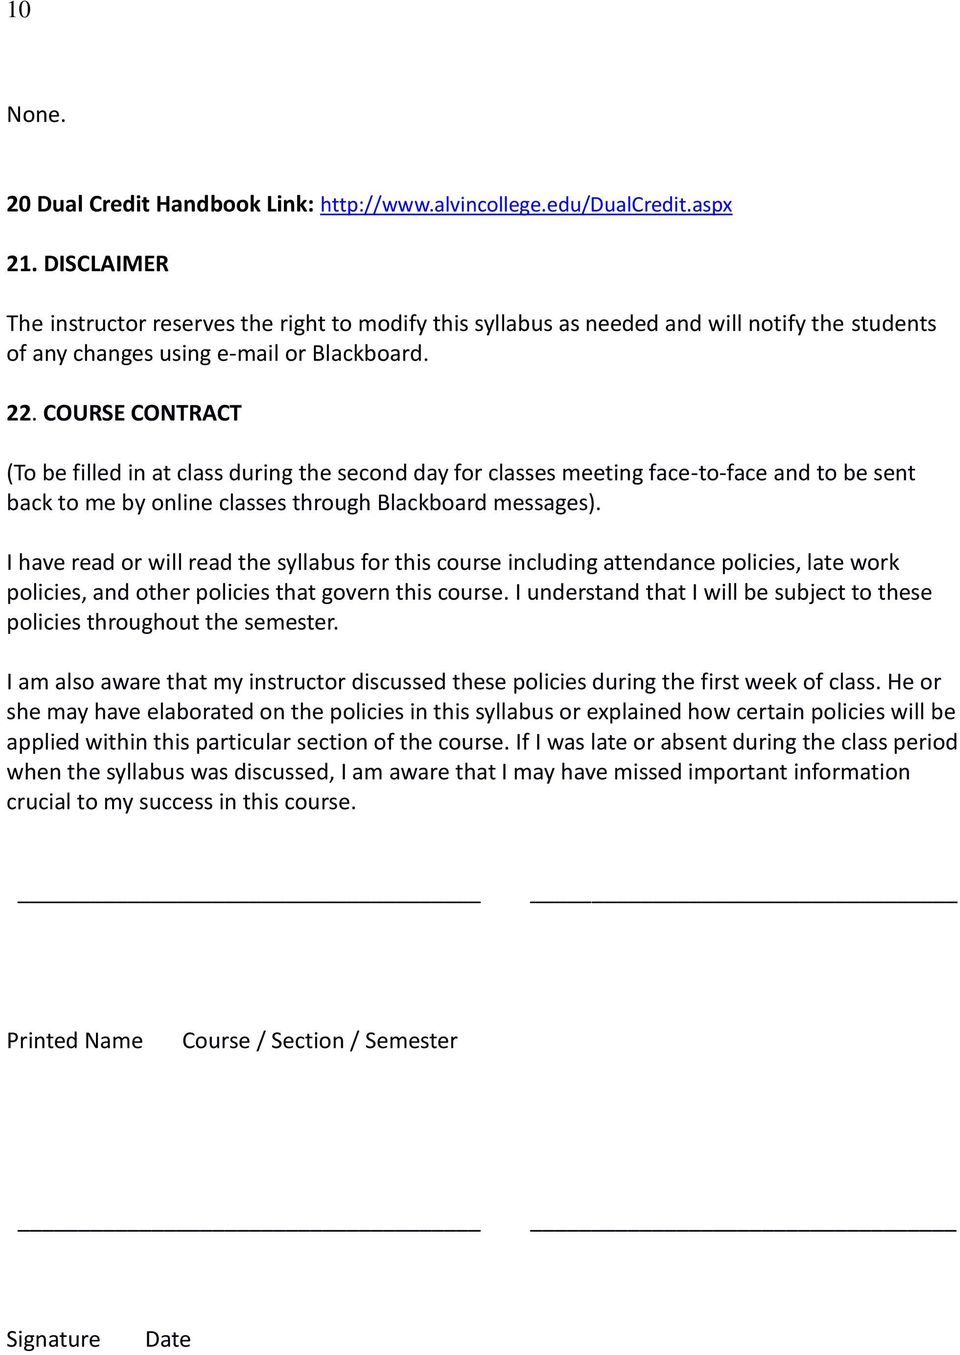 COURSE CONTRACT (To be filled in at class during the second day for classes meeting face-to-face and to be sent back to me by online classes through Blackboard messages).